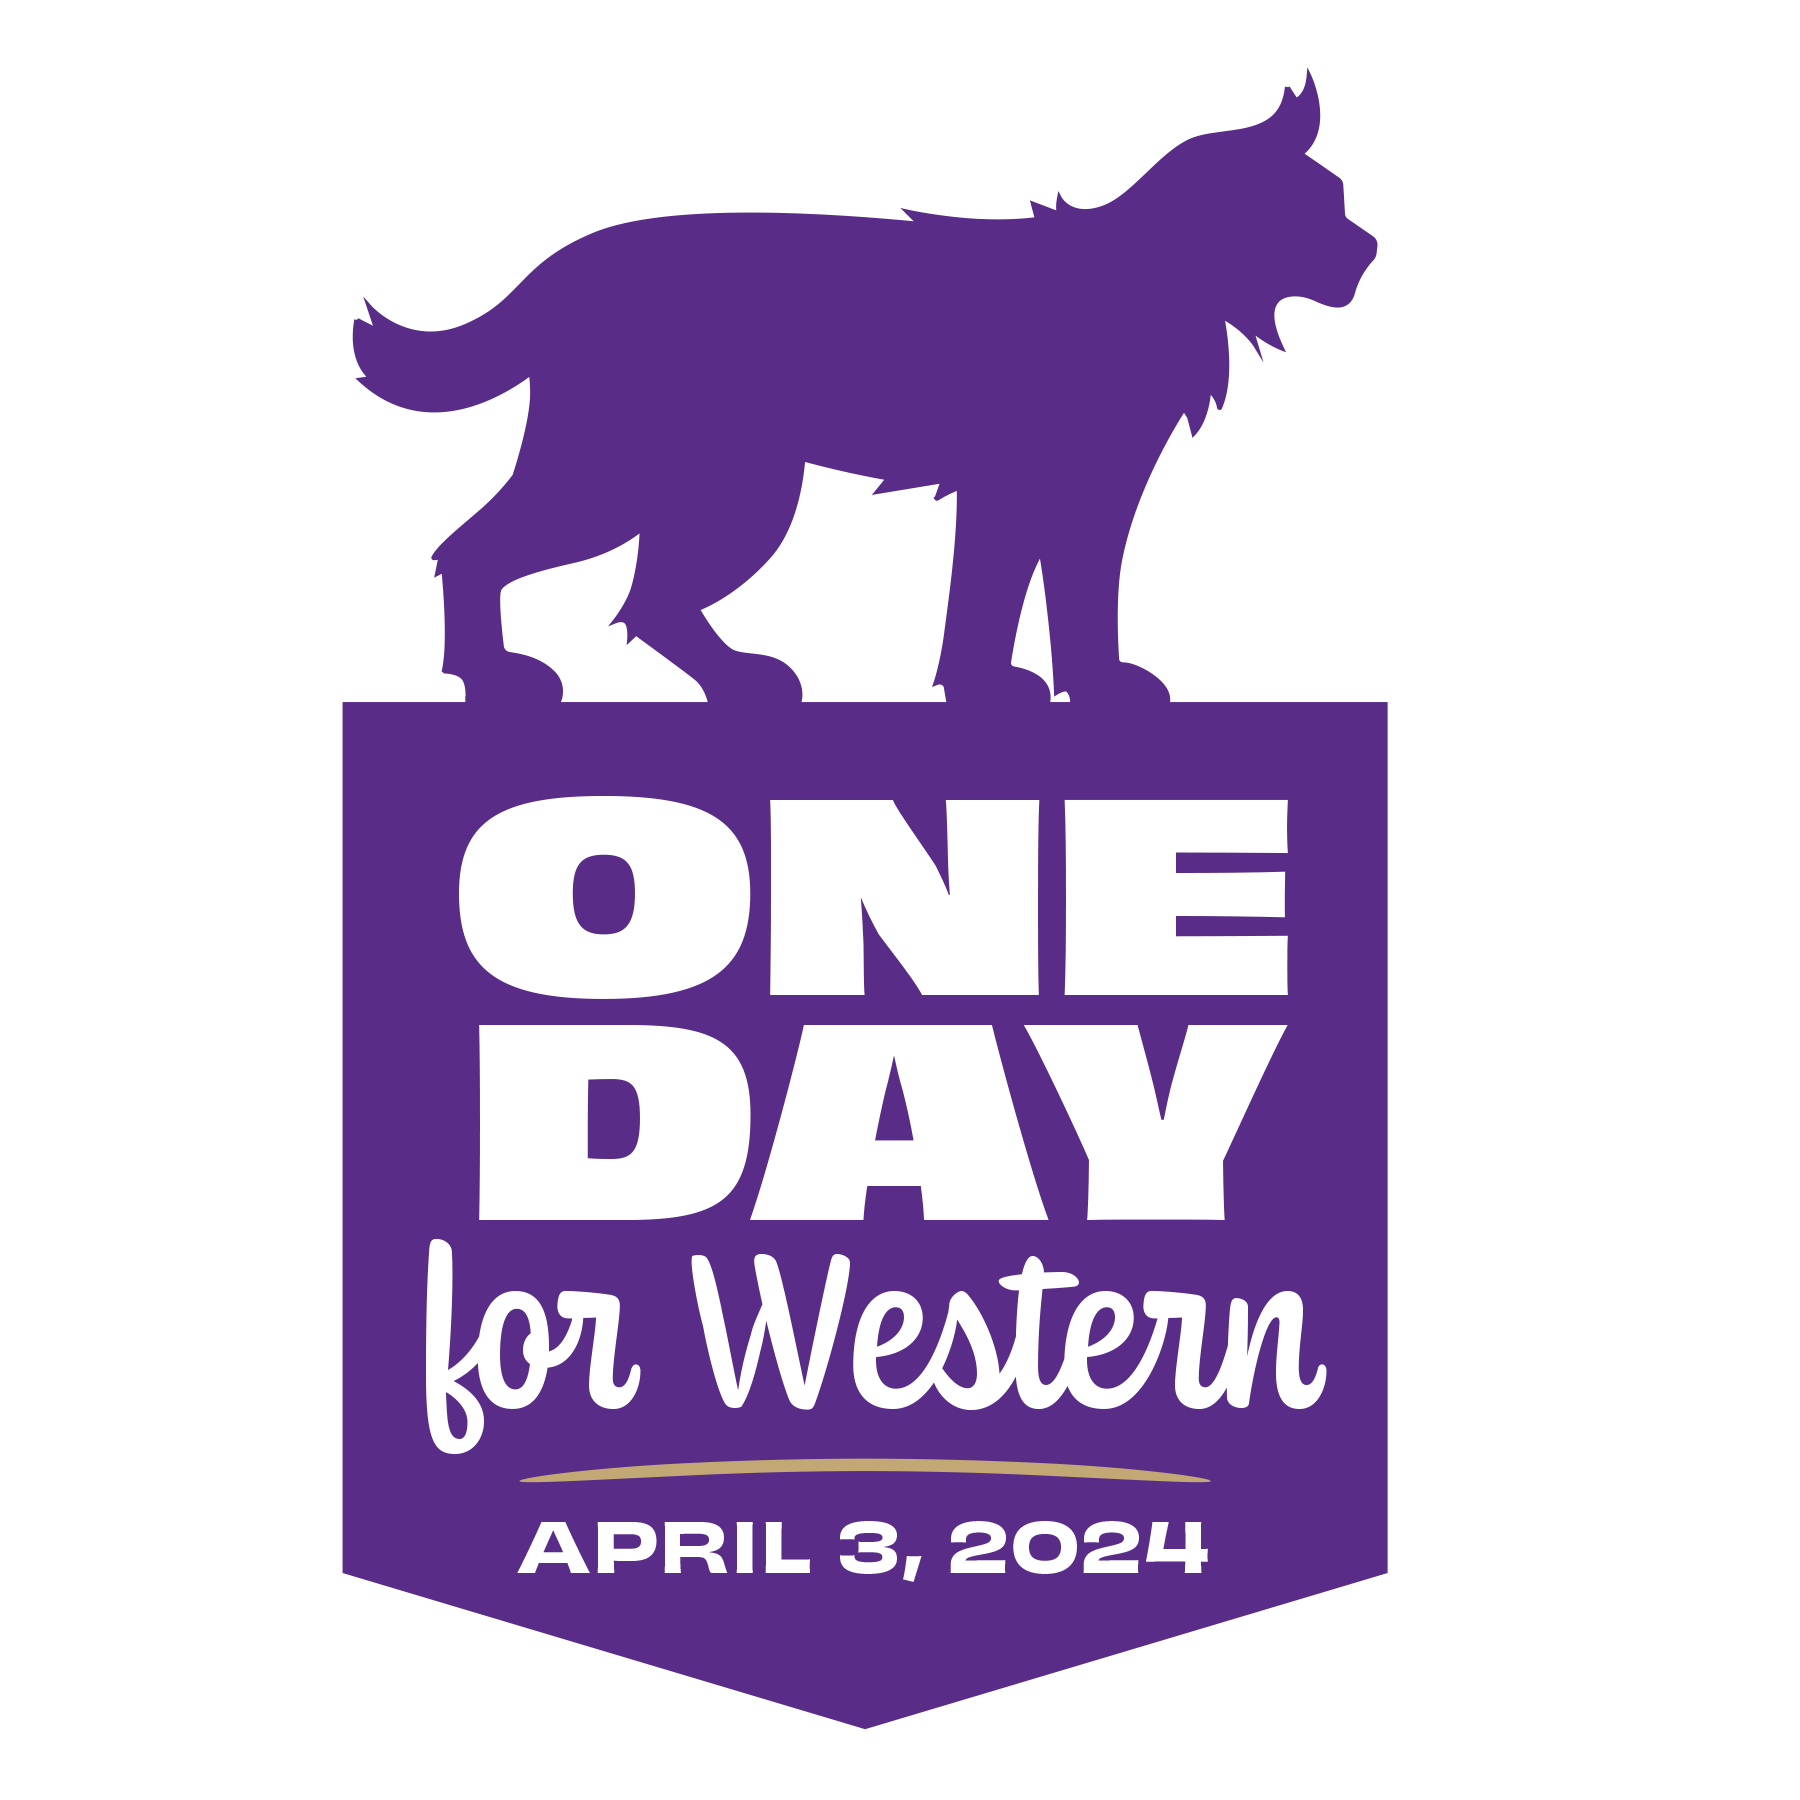 One Day for Western